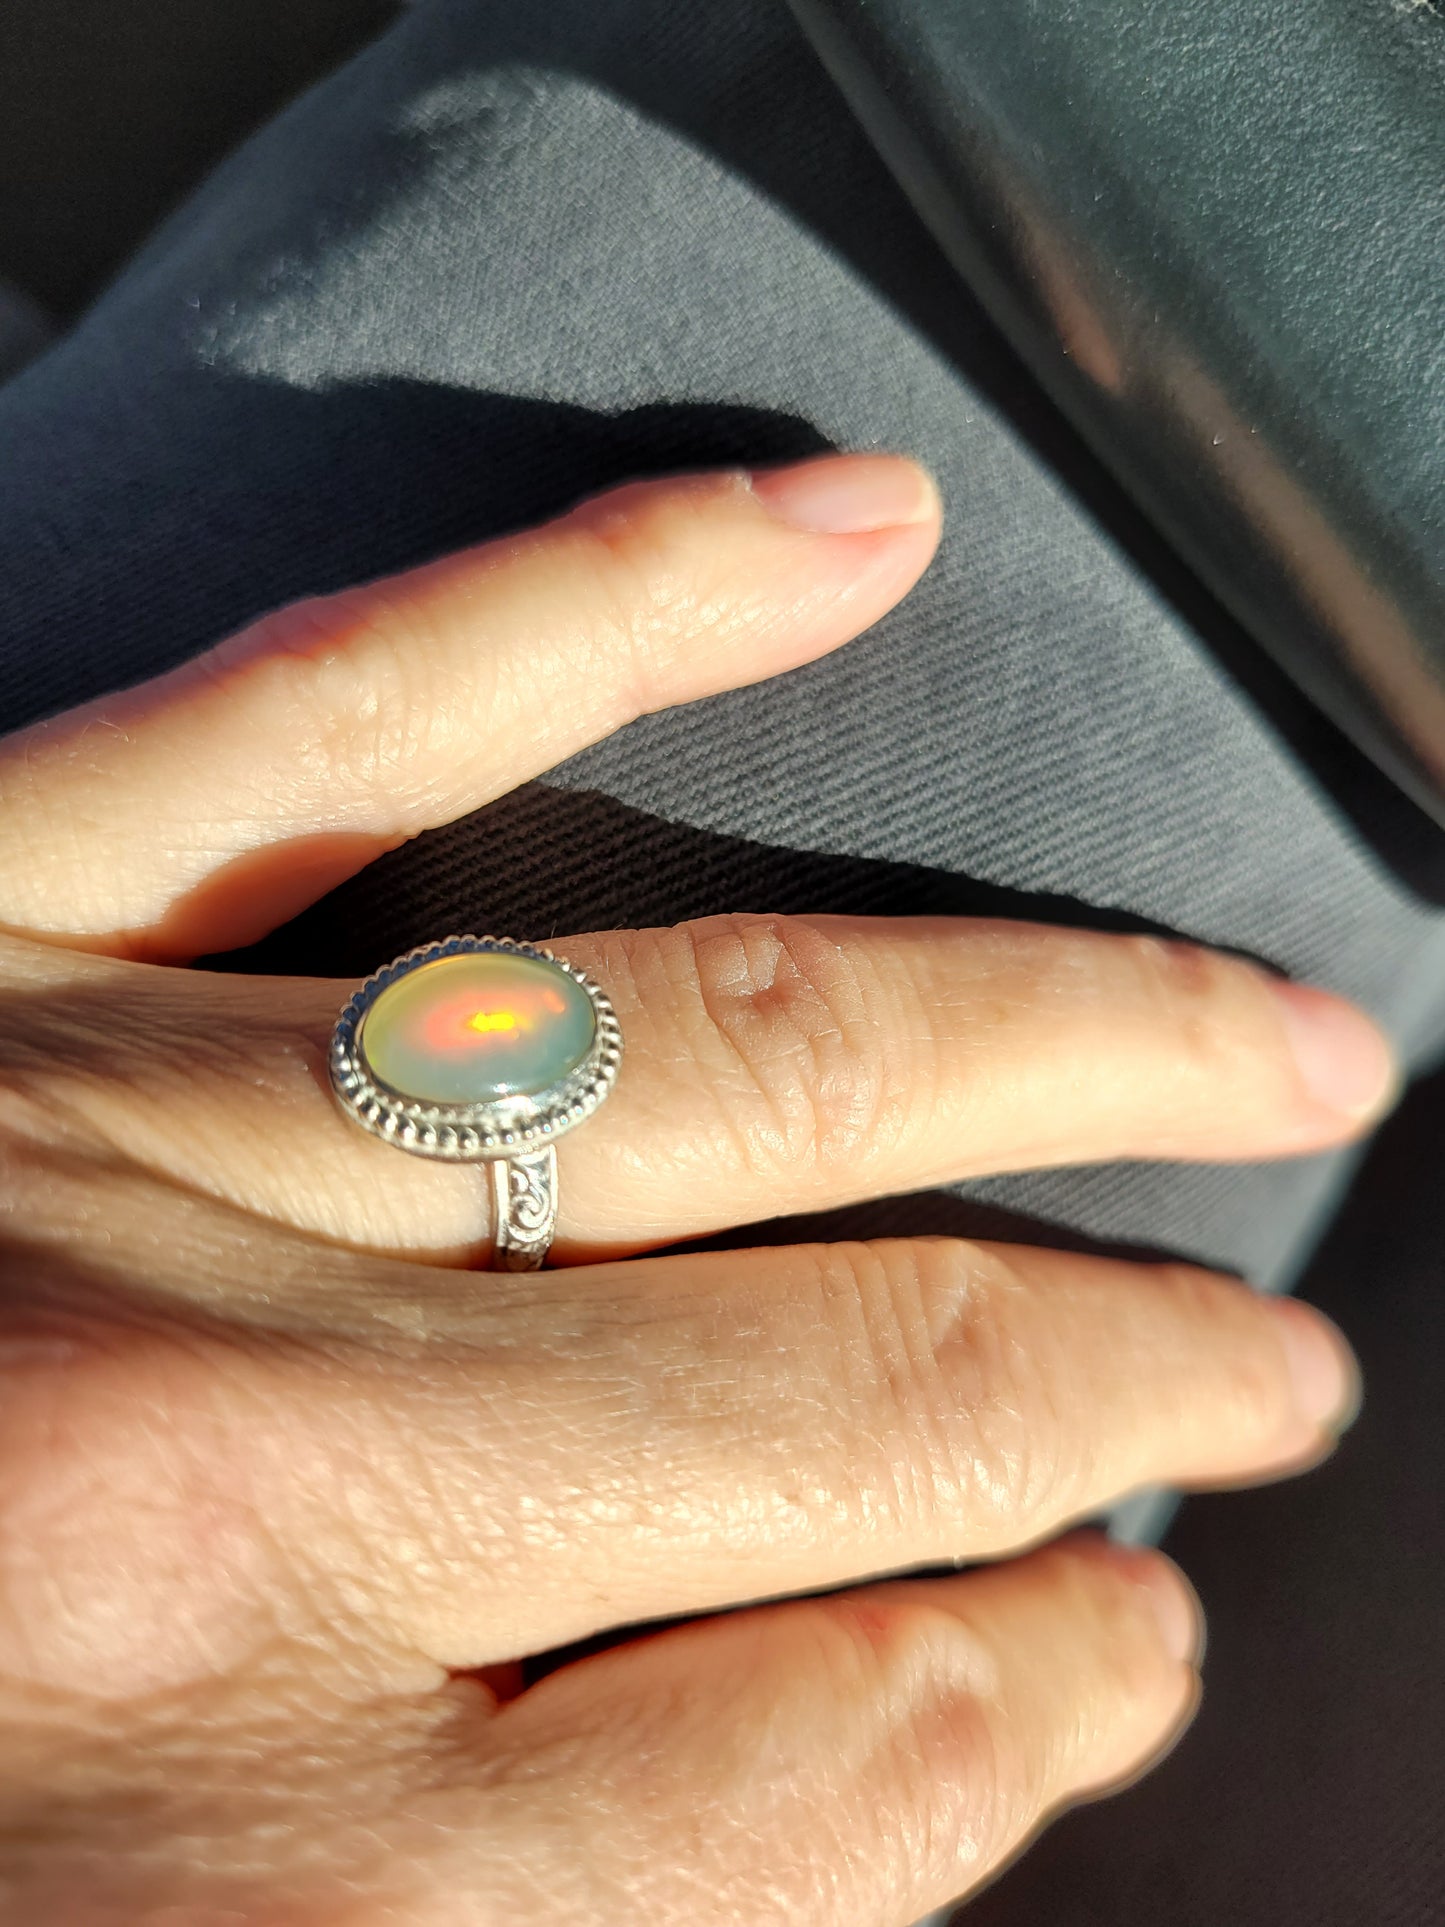 Jelly opal ring